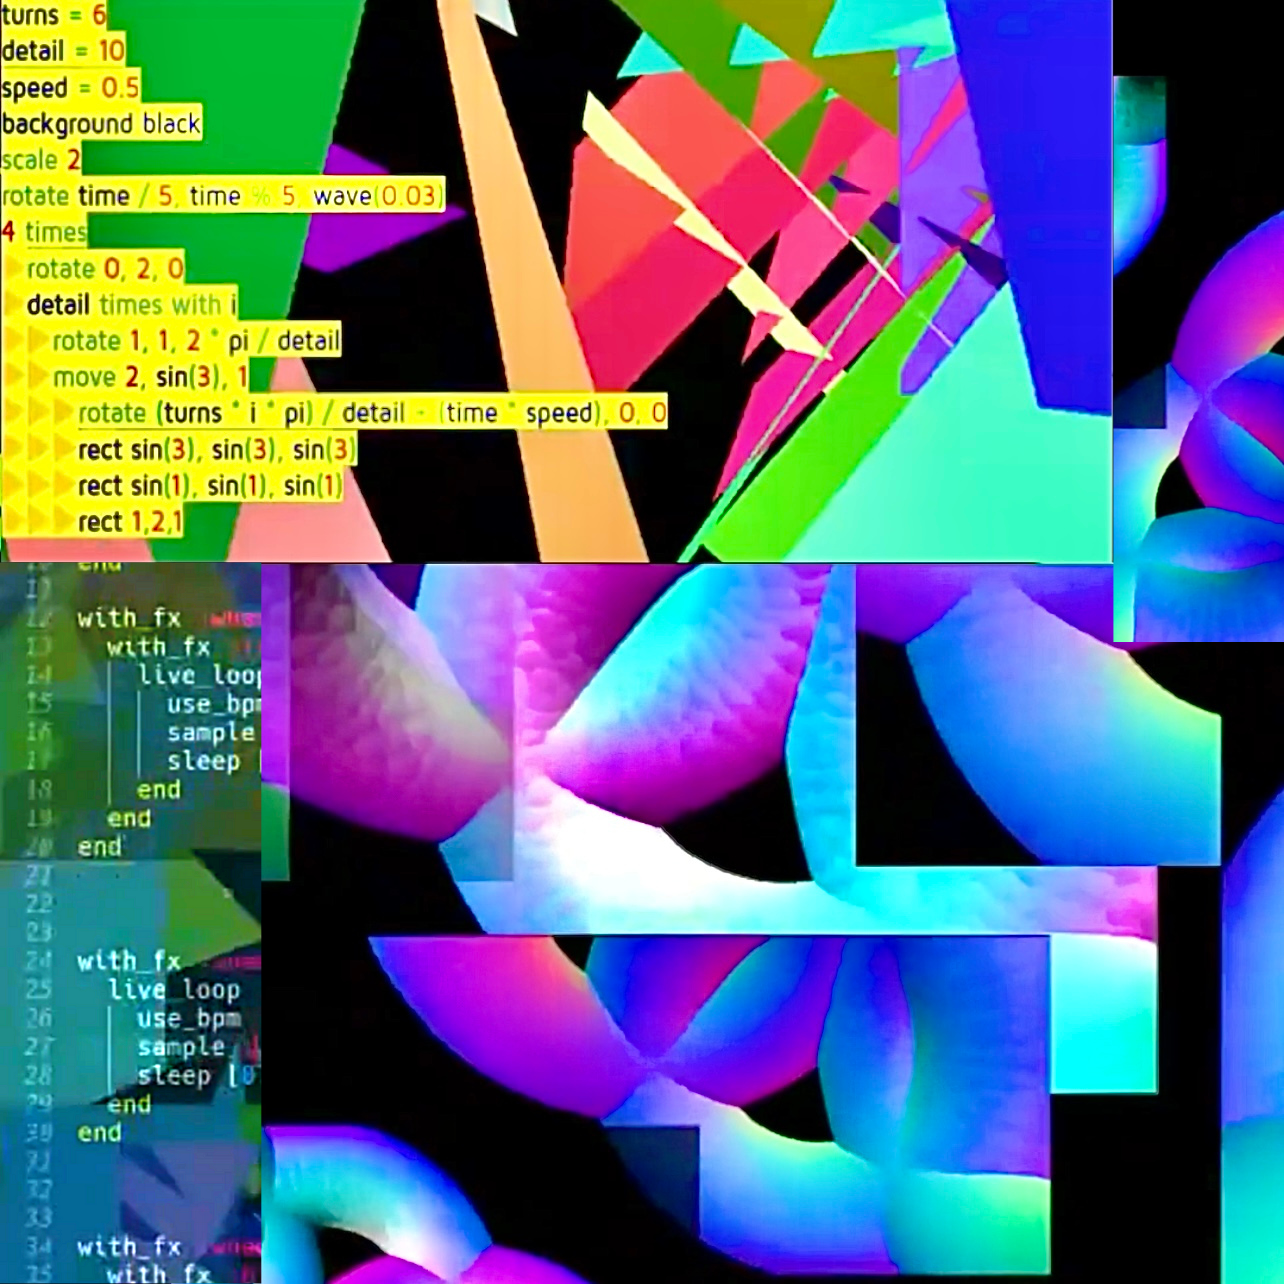 Collage in blues, greens, and yellow of coding artwork by artist